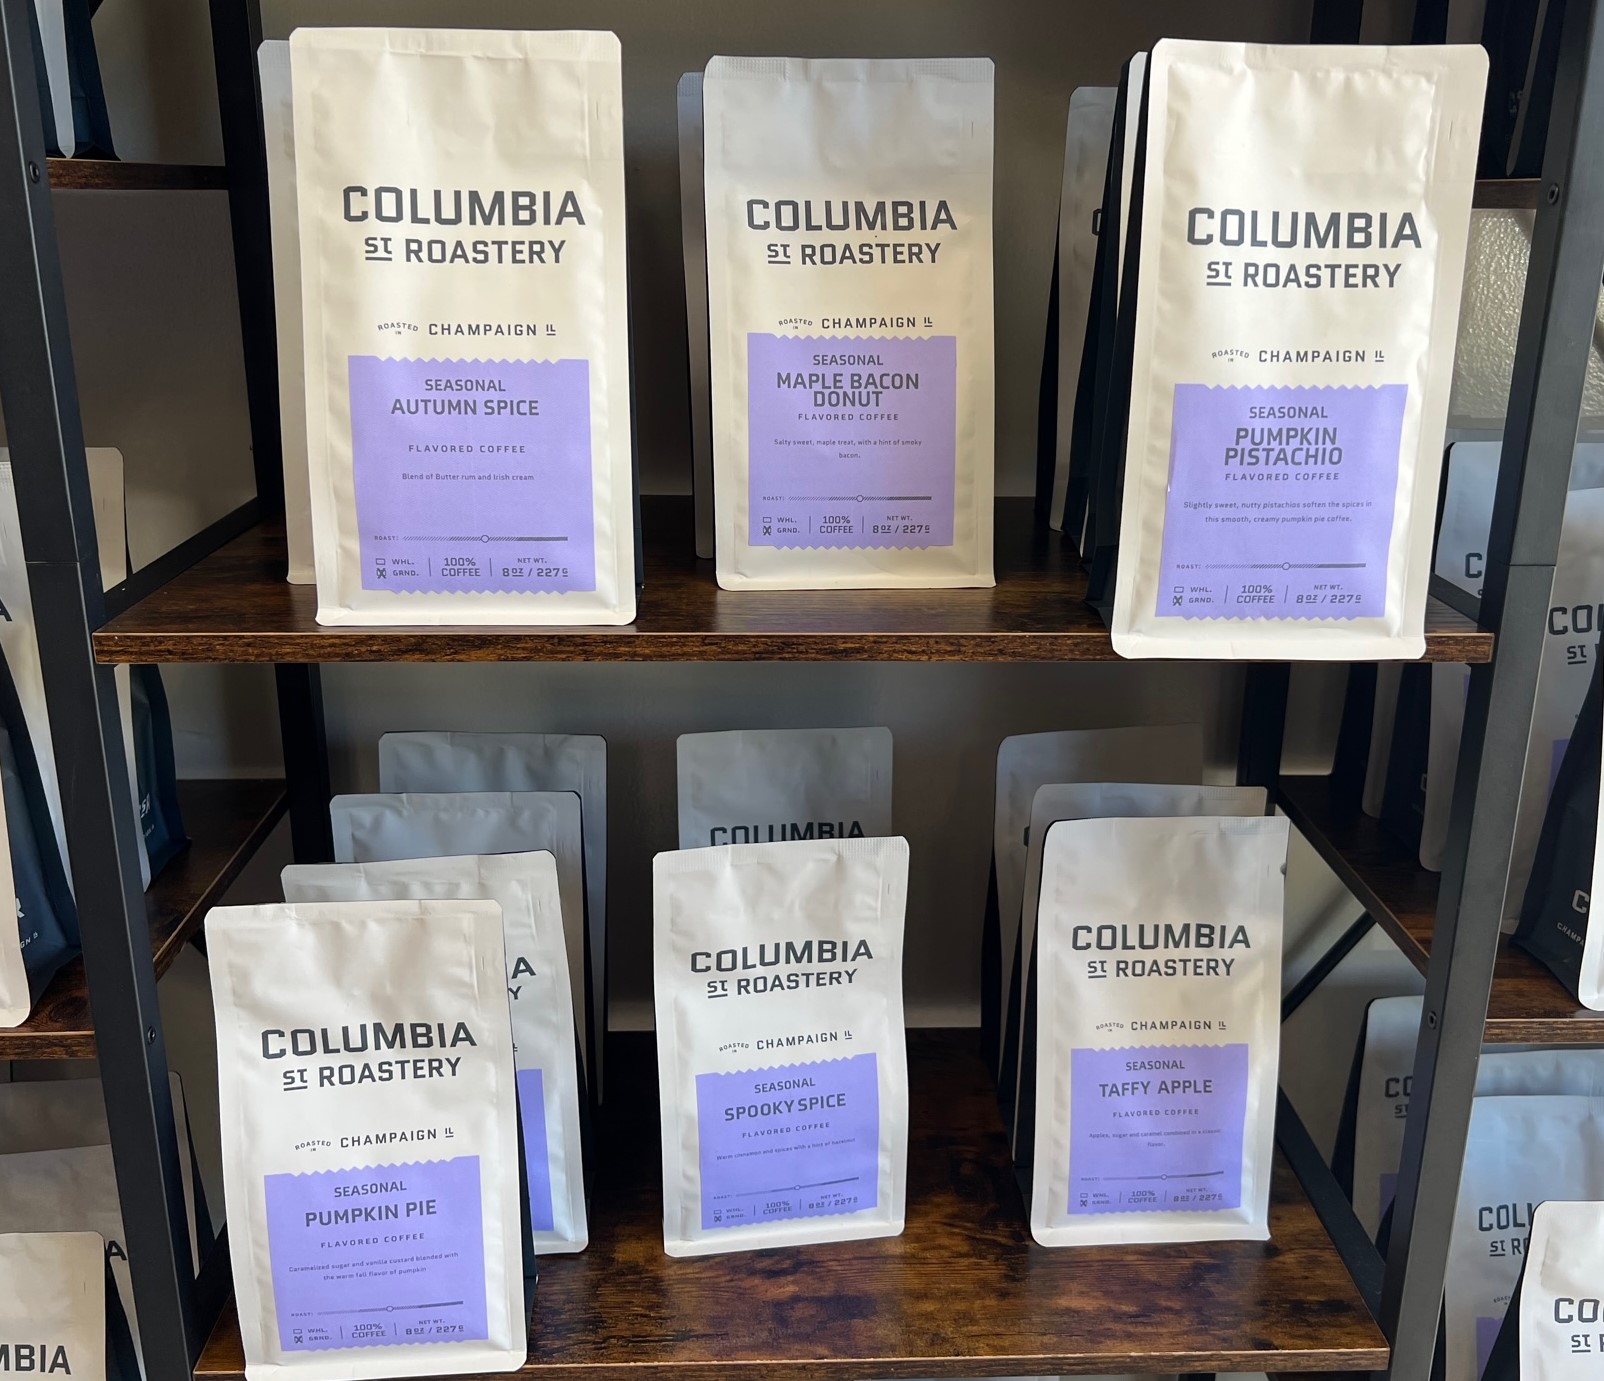 Bags of coffee are lined up on wooden shelves. The packages are off-white with a purple label.